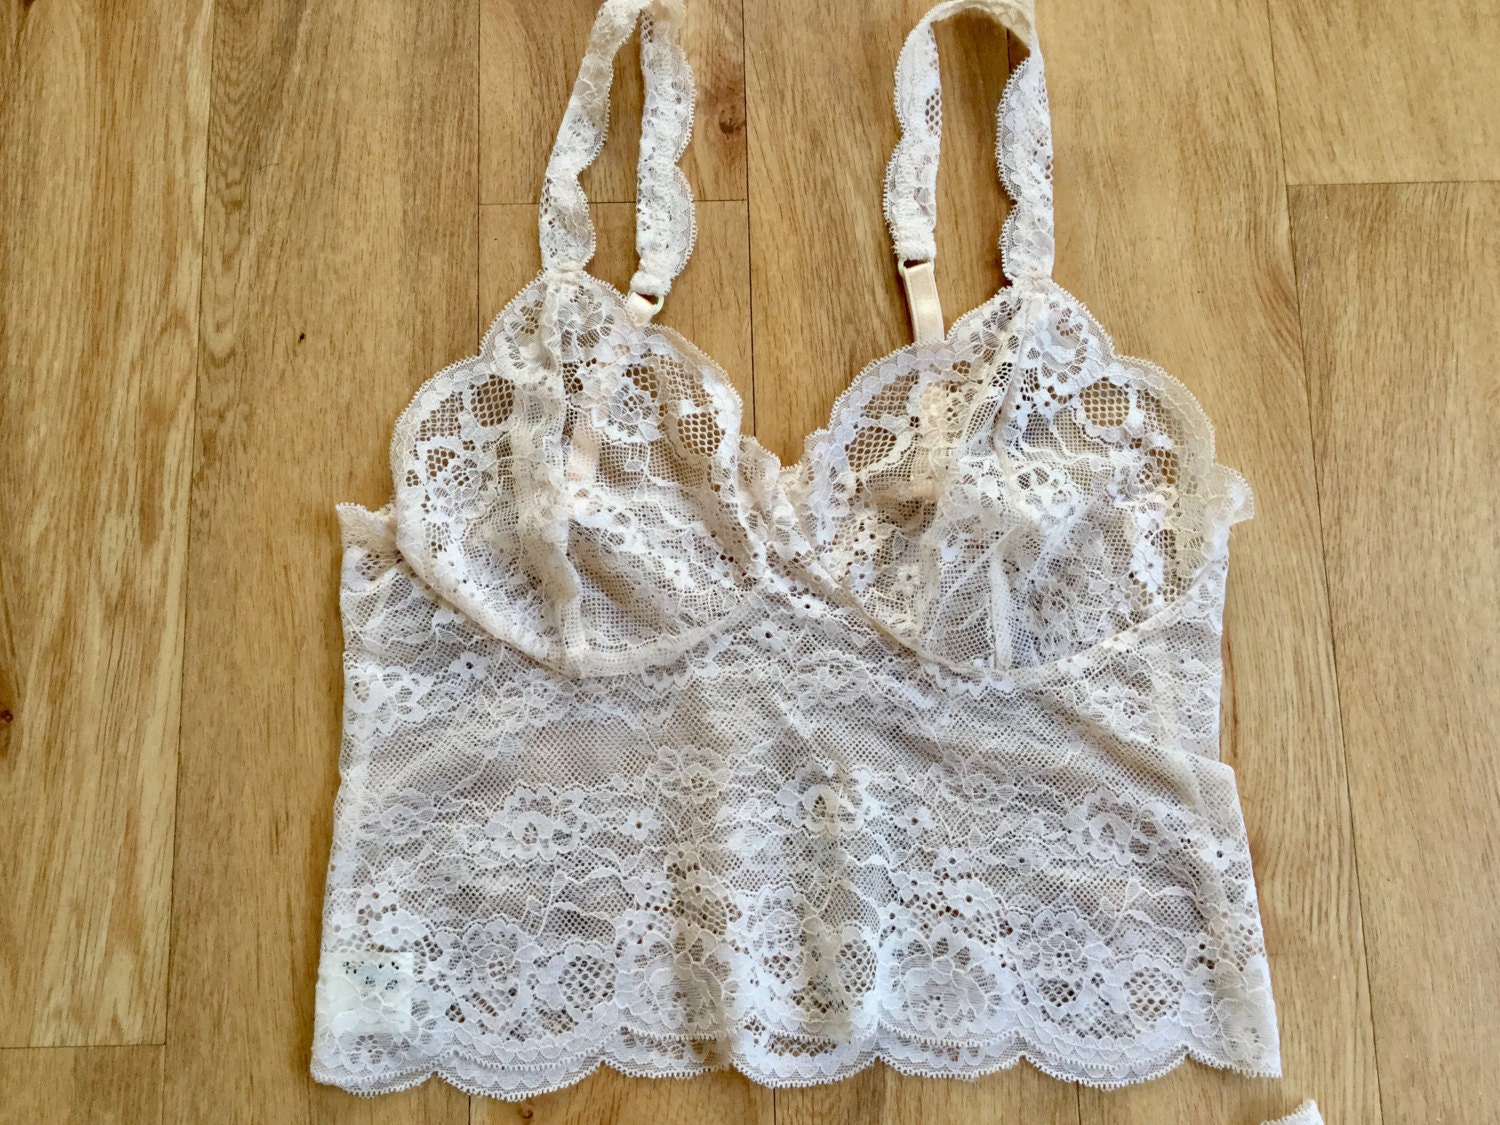 Dark cream romantic lace sheer bralette and French knicker | Etsy